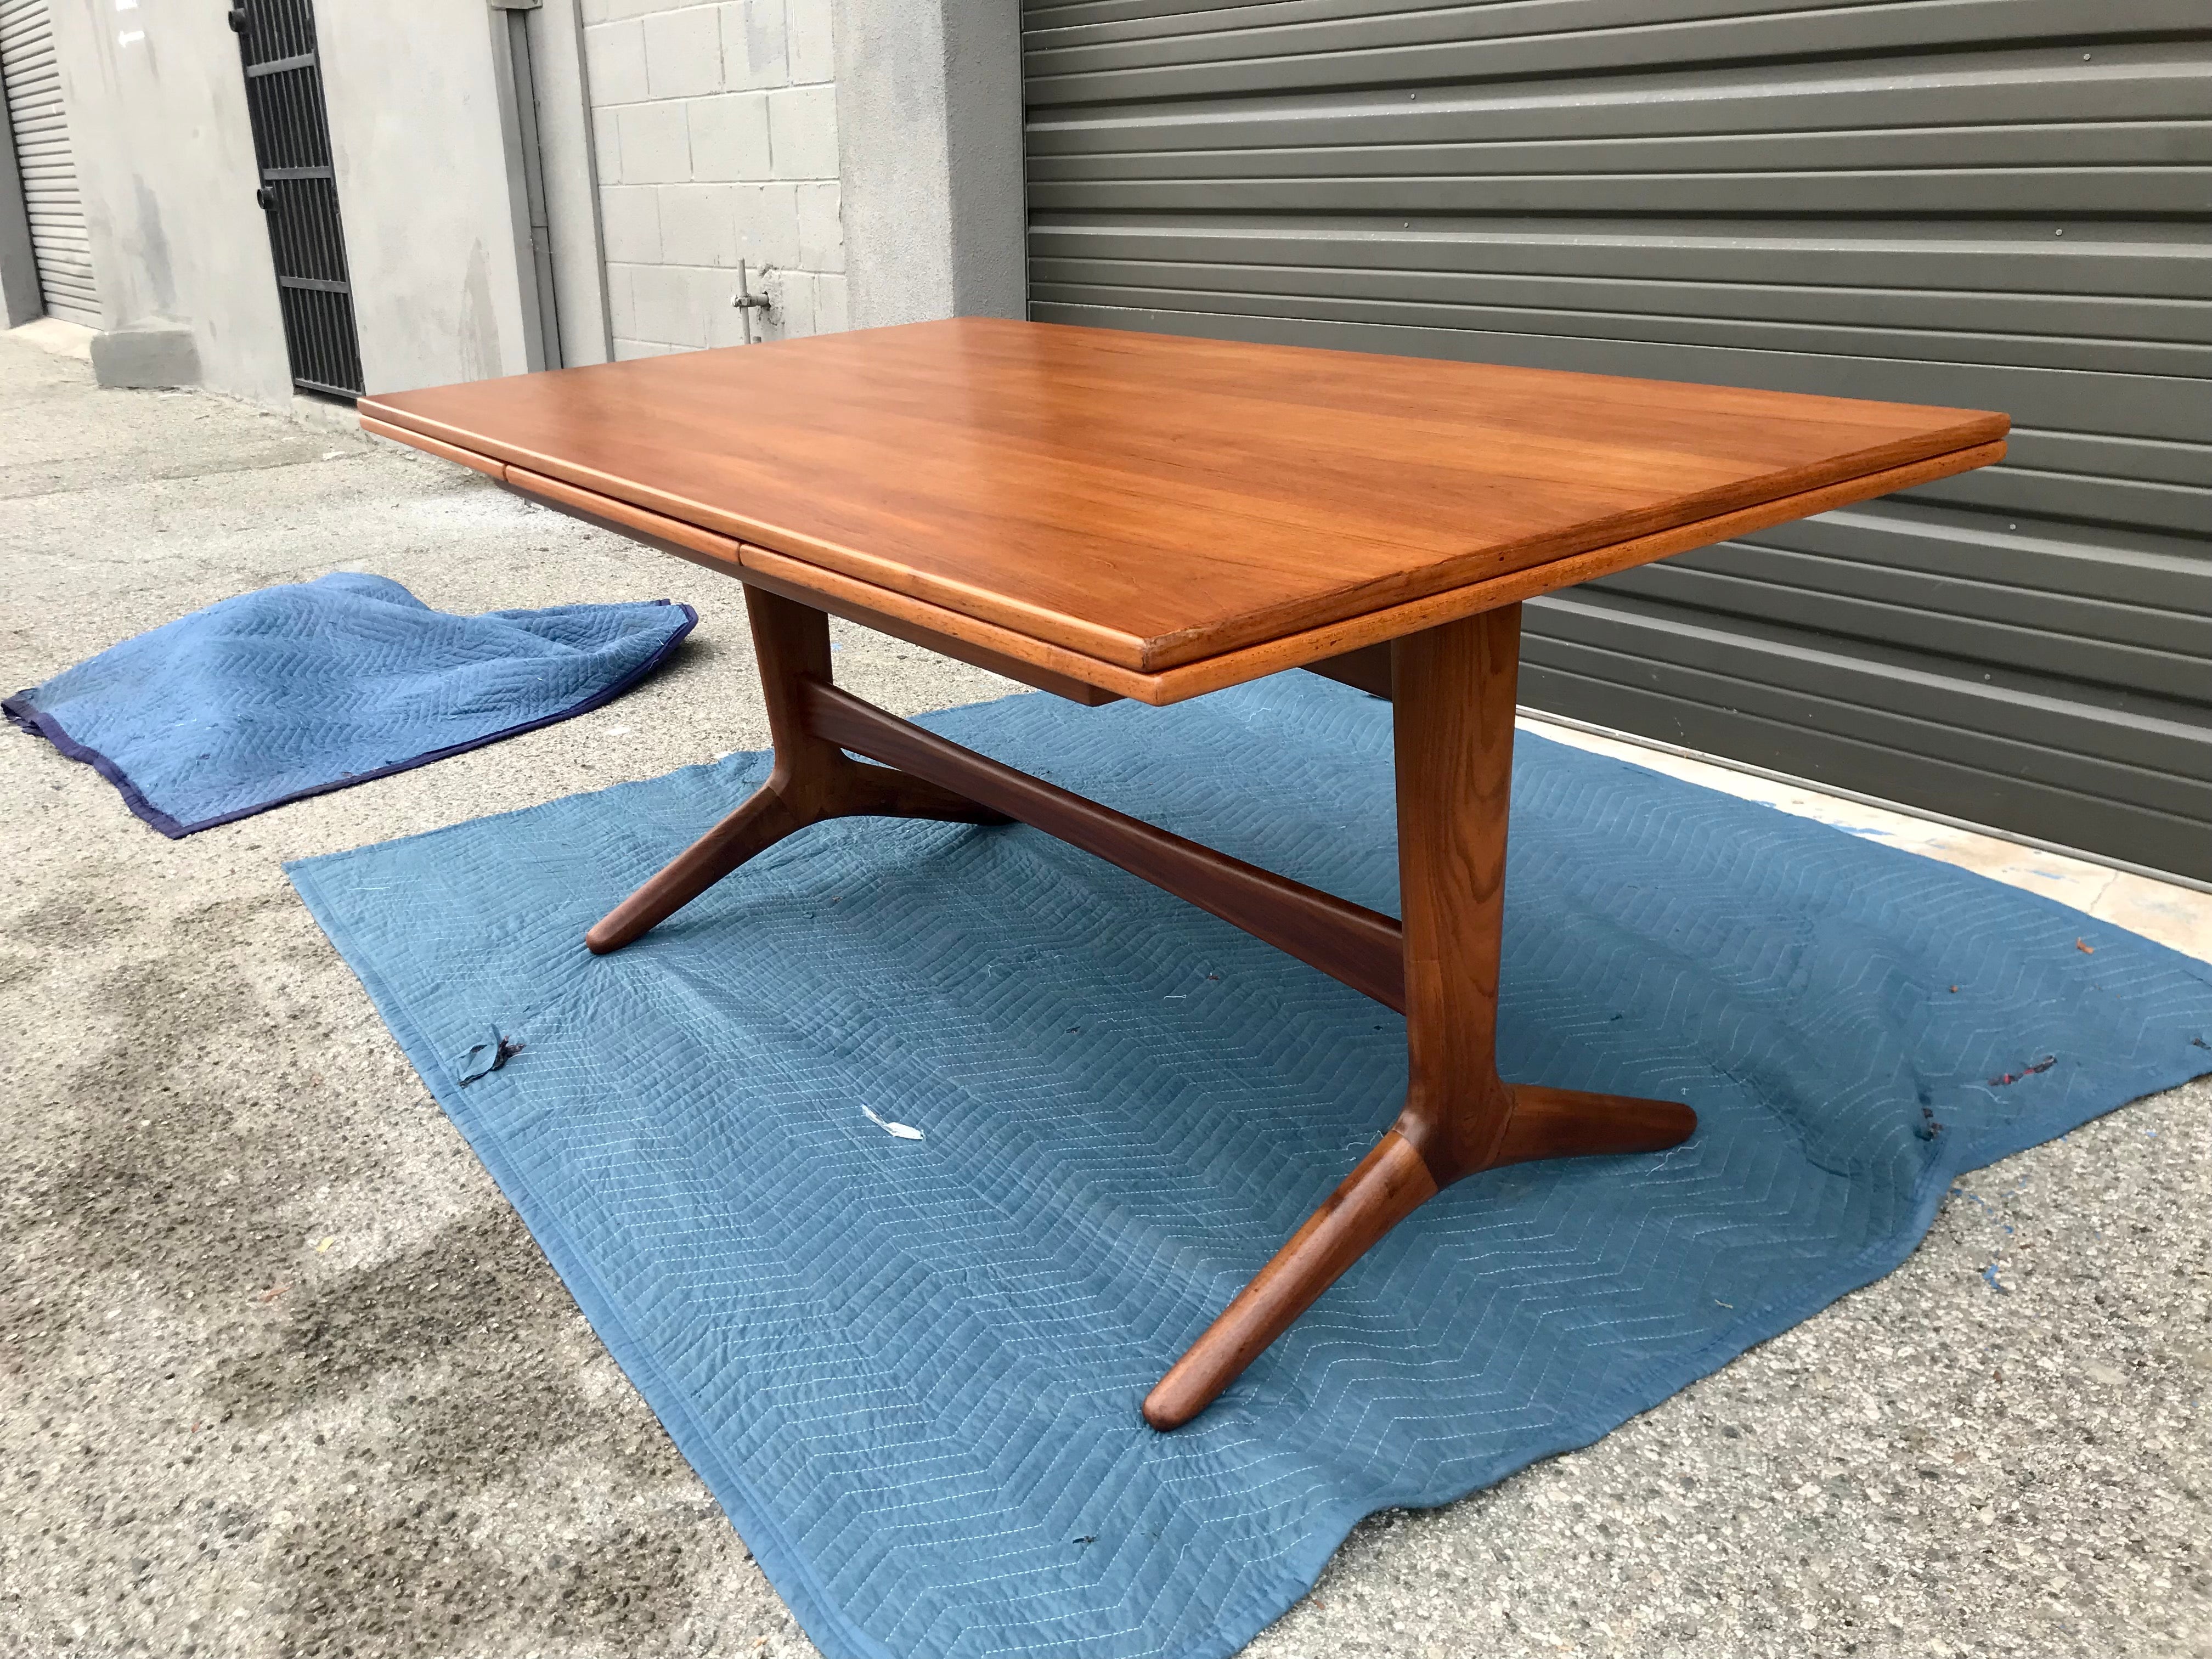 Classic Danish modern design table top with unique sculpted base.
The legs are sort of a fish / whale tail style form.
Two extendable leaves. 
The legs, support rails and base top frame are solid teak wood, the table top and leaves are teak